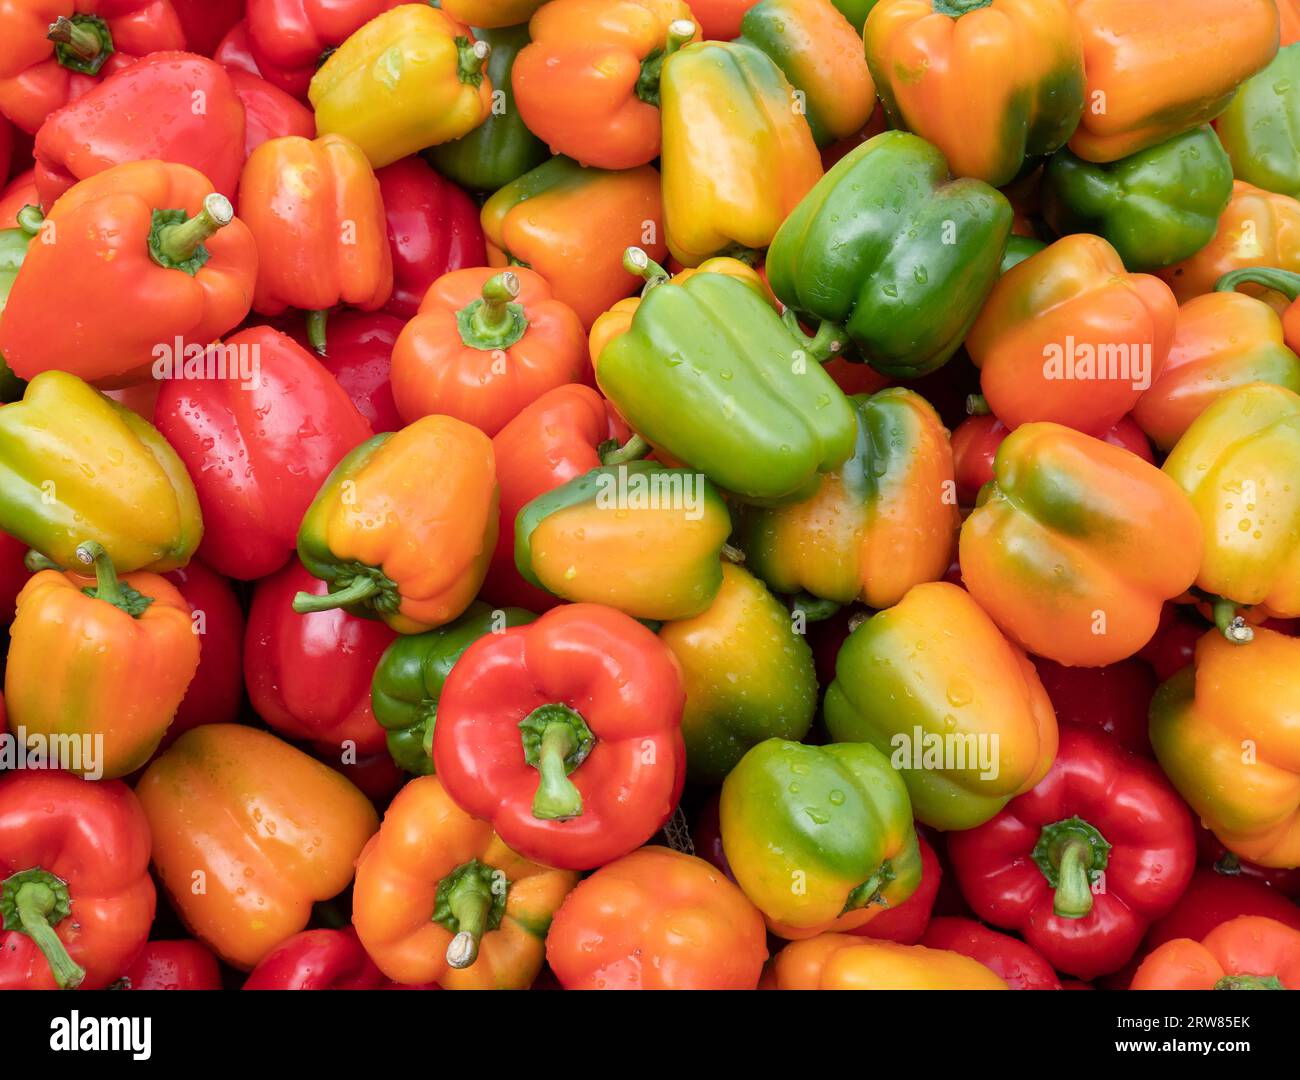 Lots of colorful bell peppers close up. Stock Photo